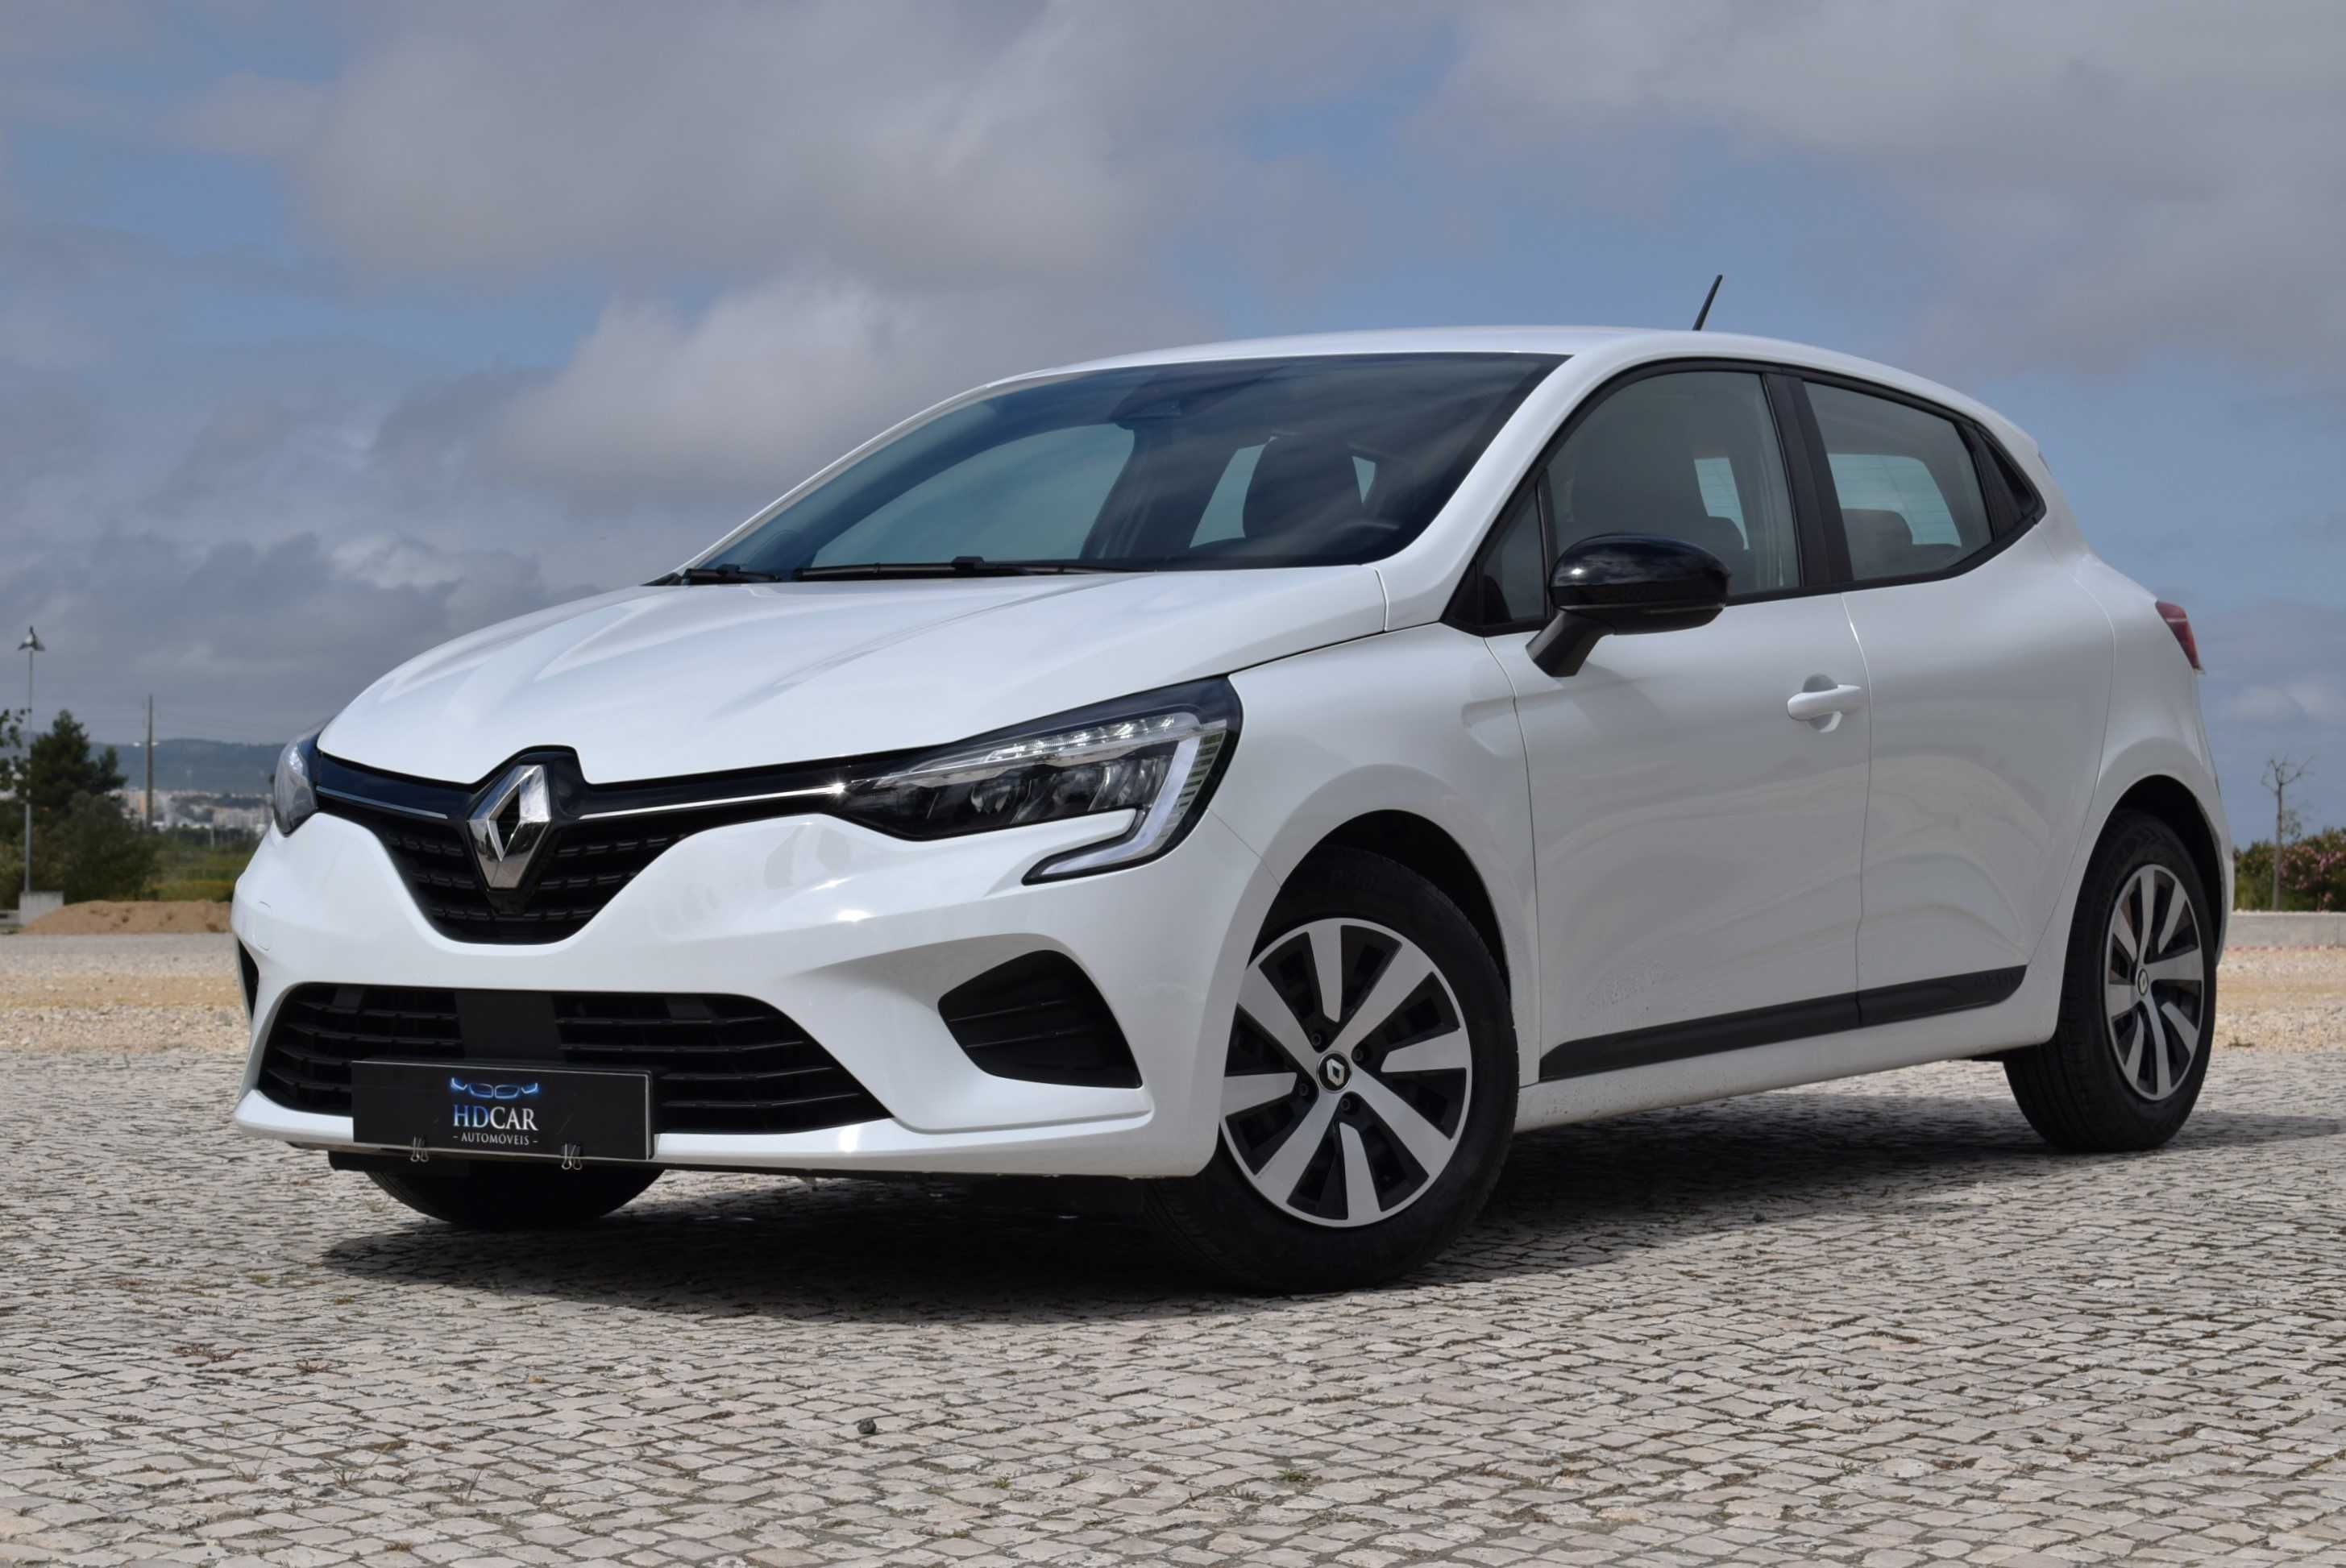 2023/02 | Renault Clio 1.0 TCe Equilibre 90cv | 25 Mil KM